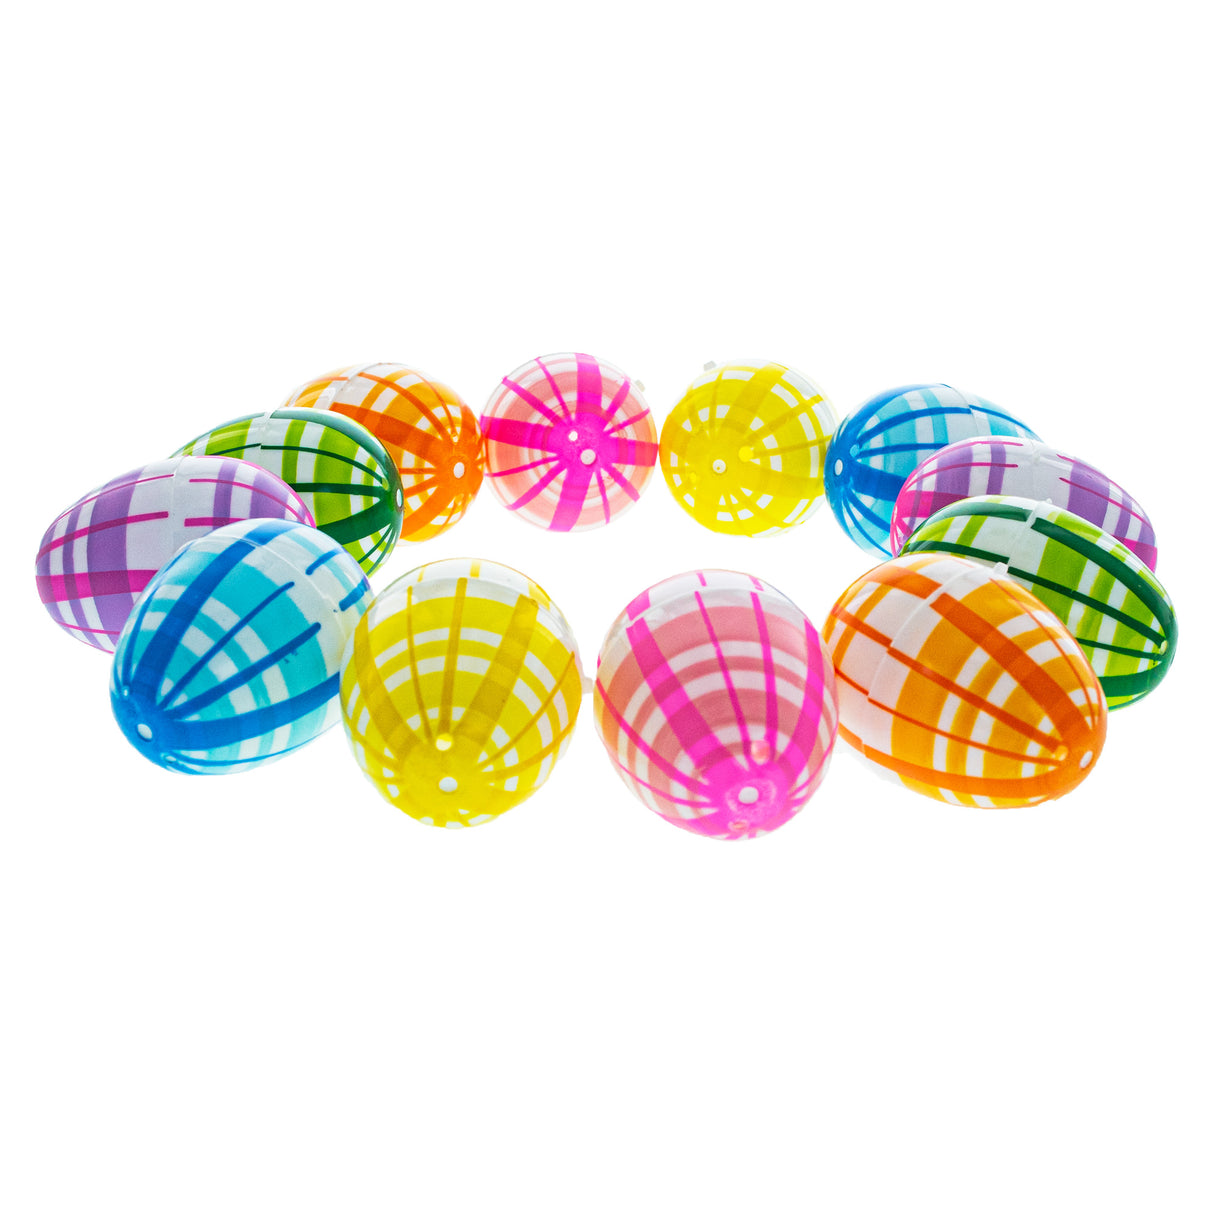 Set of 12 Multicolored Plaid Plastic Easter Eggs 2.25 Inches ,dimensions in inches: 2.25 x  x 1.5